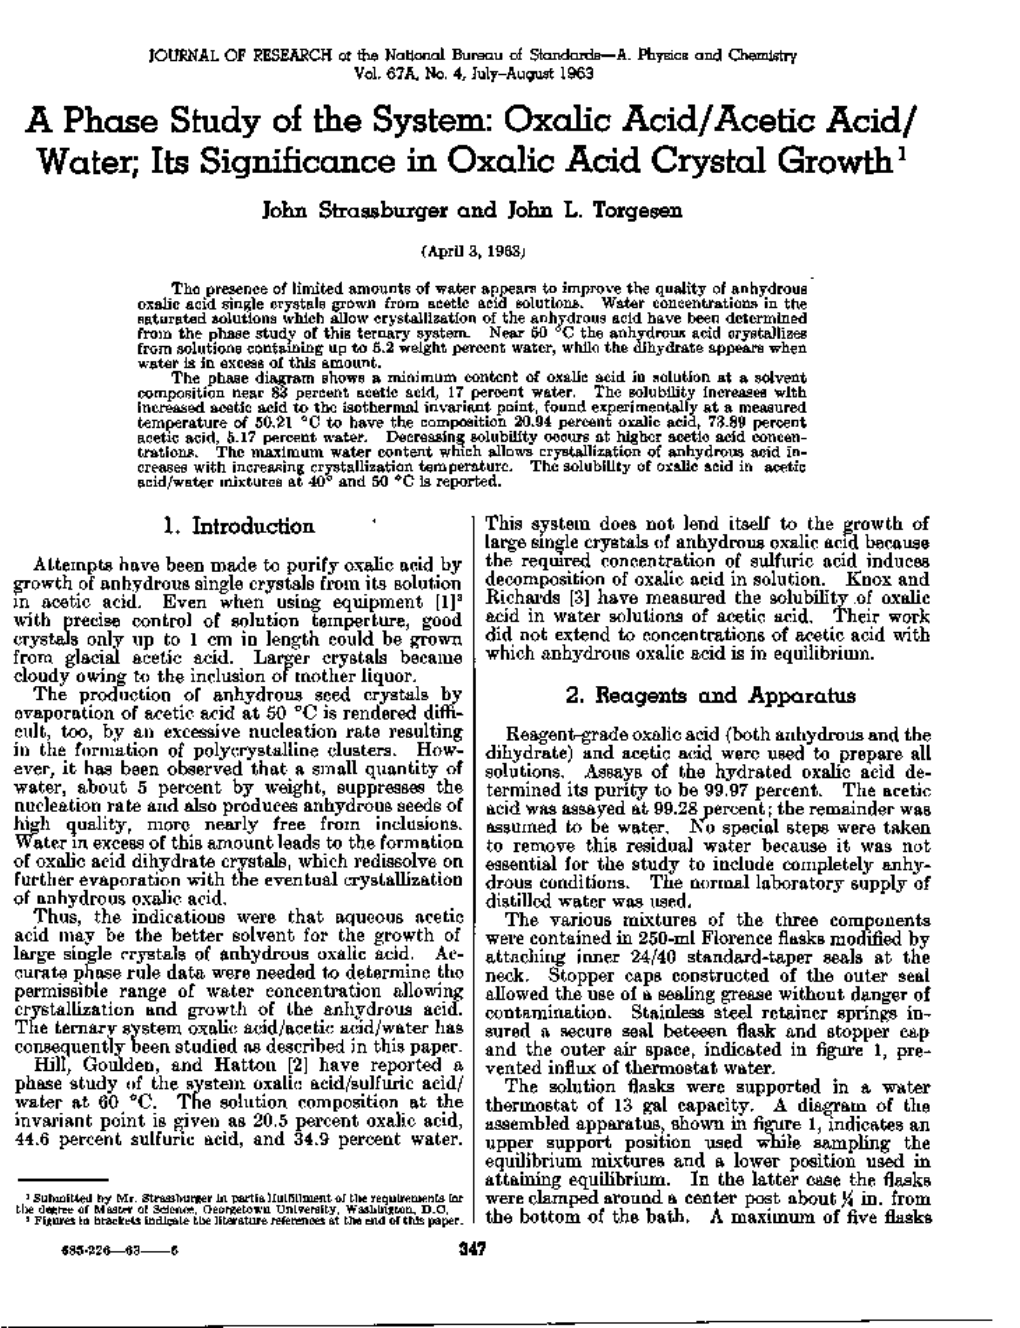 Oxalic Acid/Acetic Acid/ Water; Its Significance in Oxalic Acid Crystal Growth1 John Strassburger and John L